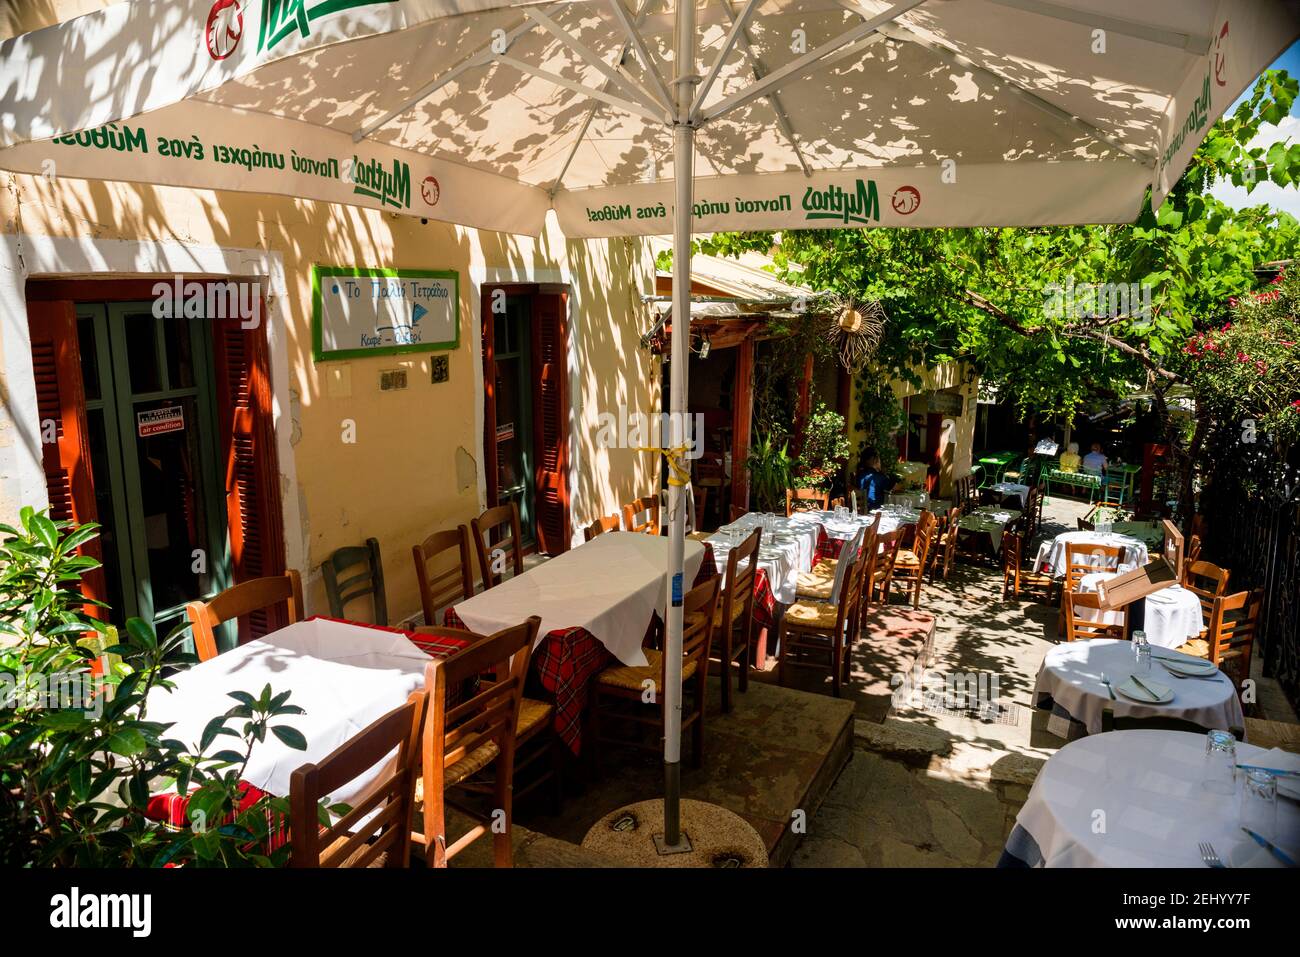 Terraced tavern in the neighbor of Plaka, Athens. Stock Photo